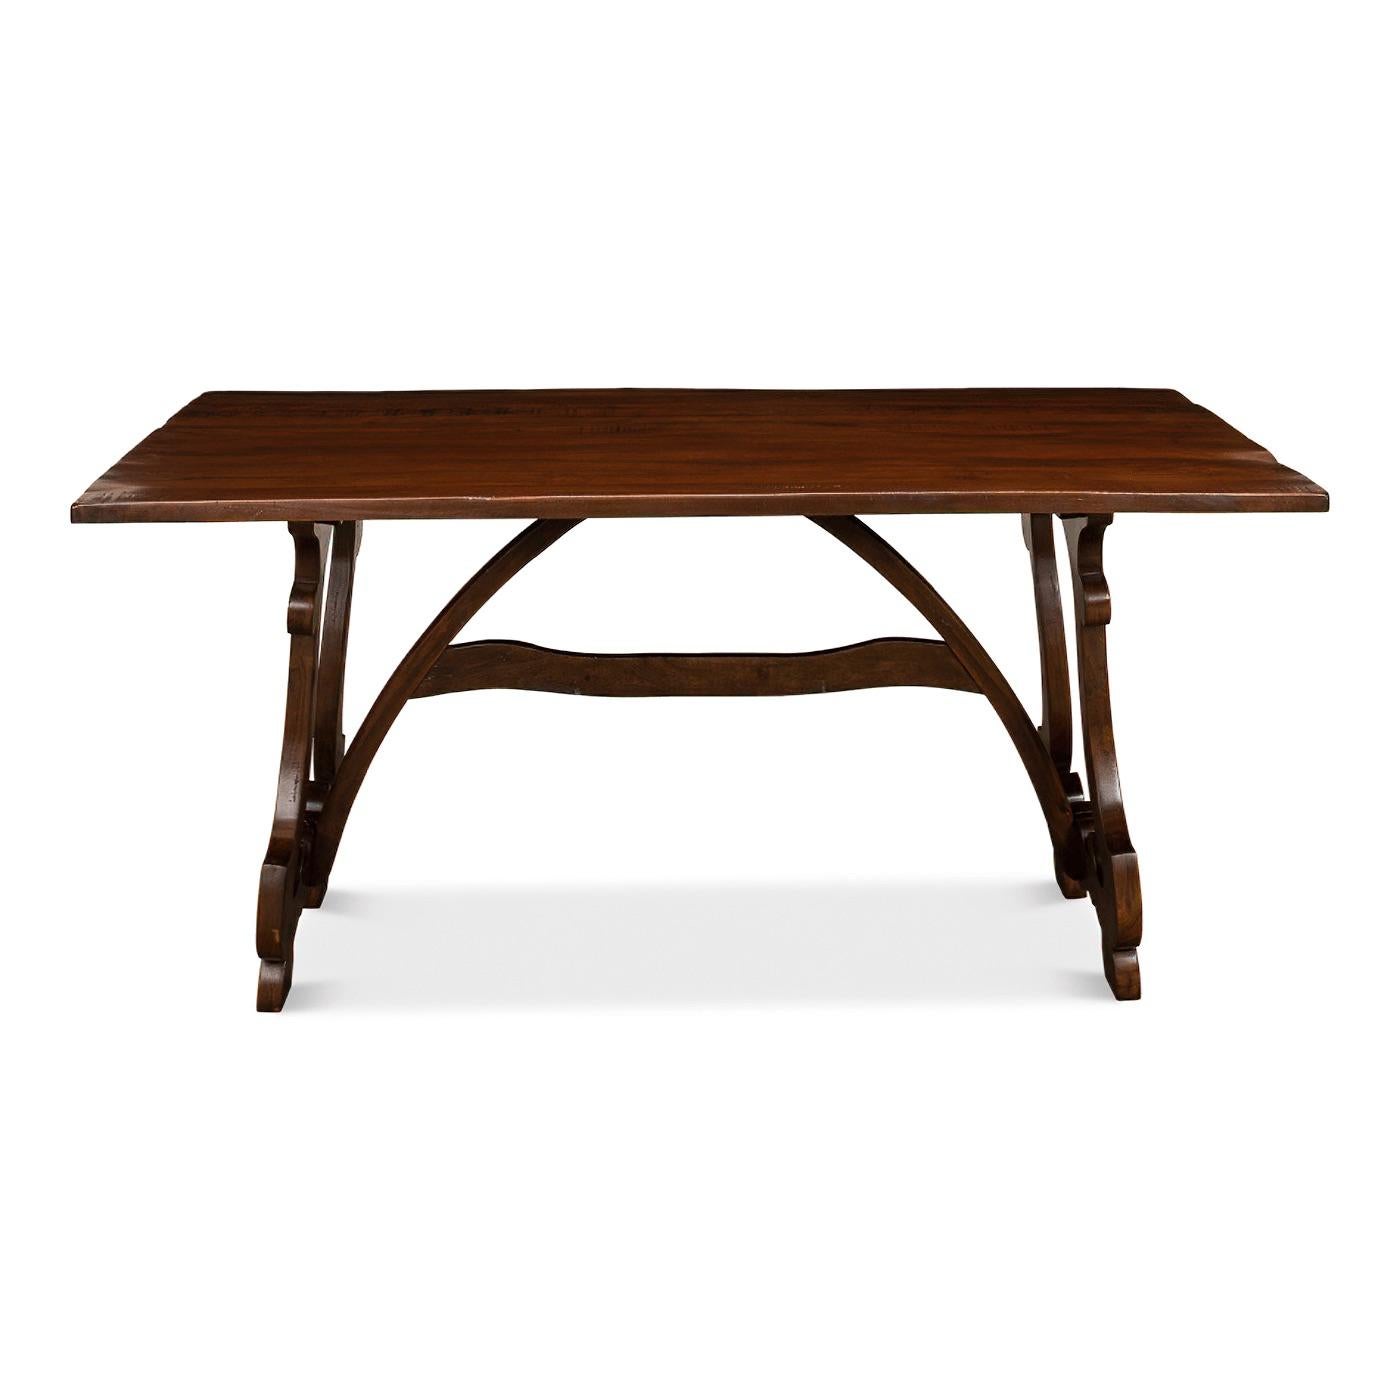 A European country-style dining table with a beautifully carved trestle end base in a rich walnut finish. 

Dimensions: 63